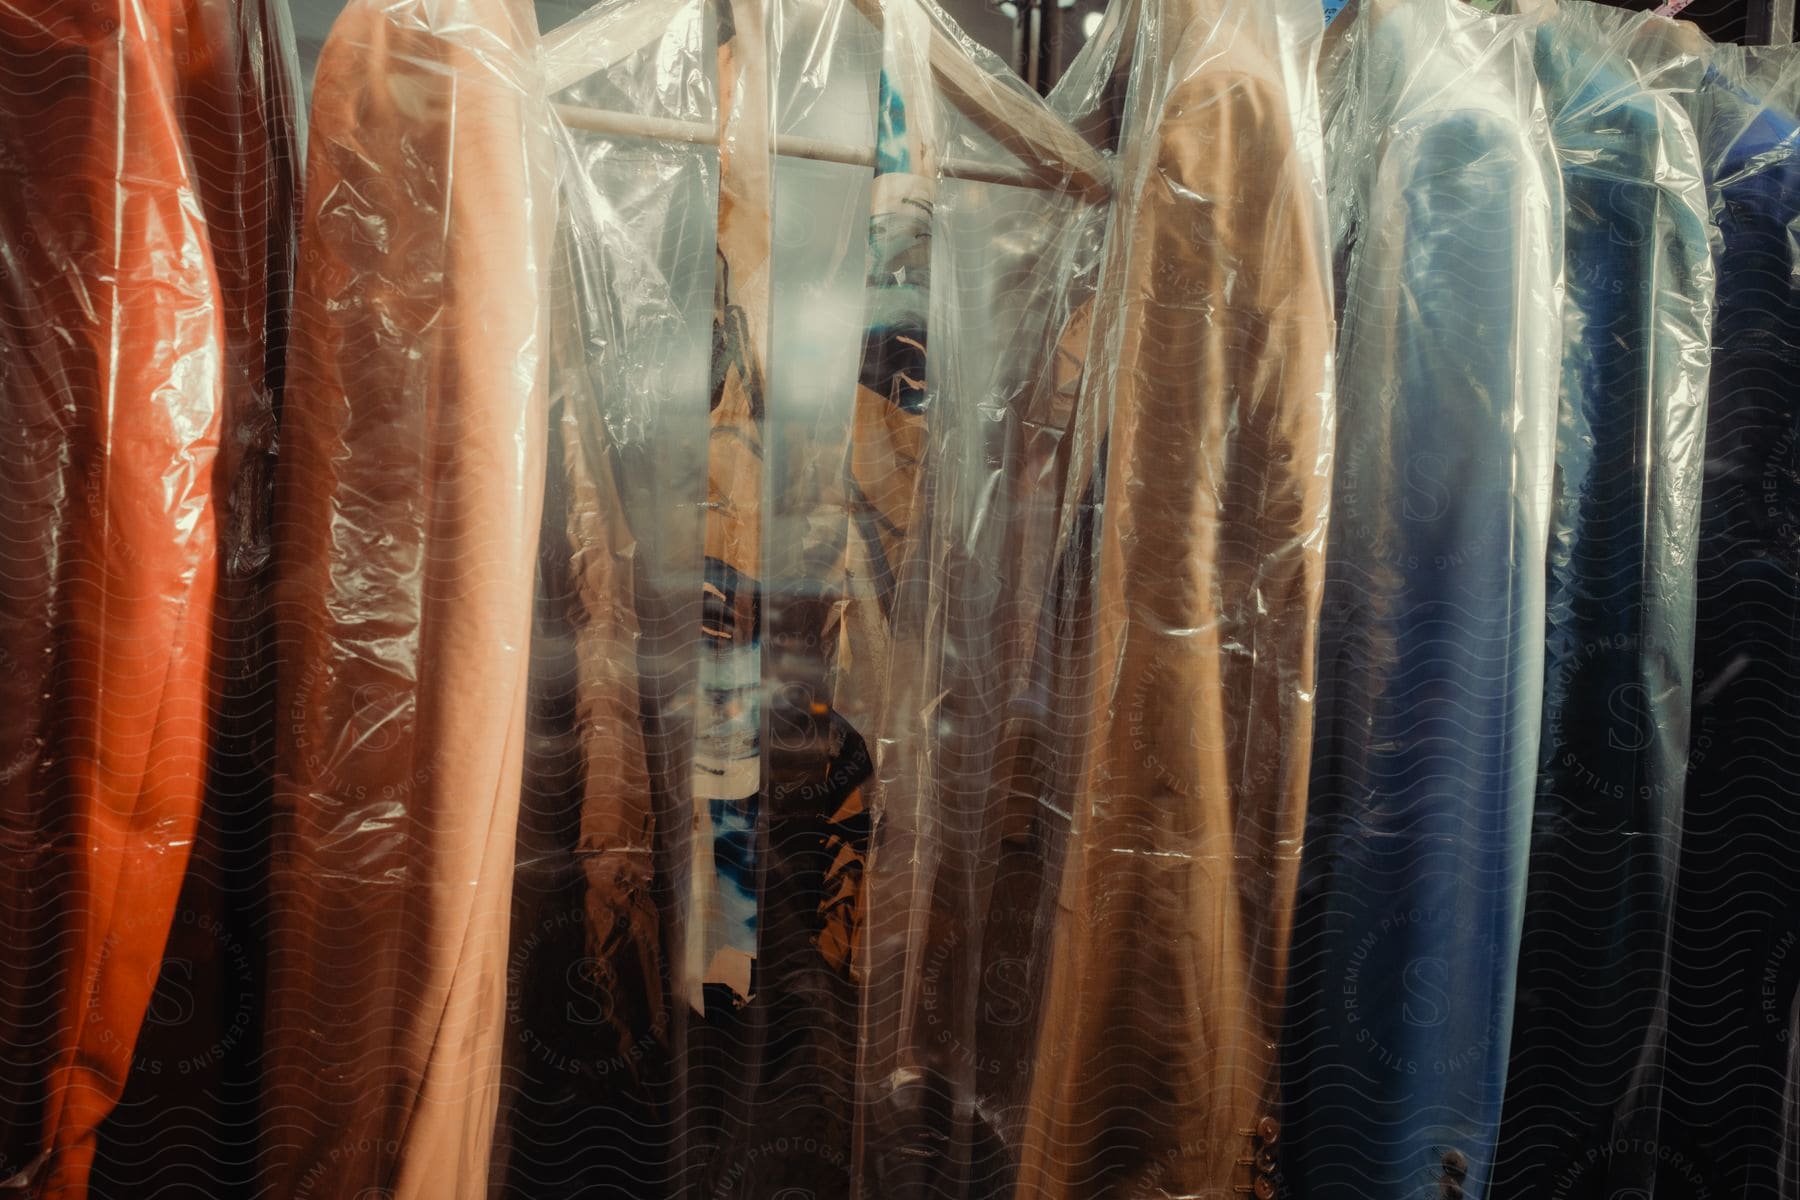 Close-up of blazers on hangers of different tones and colors protected by transparent plastic.